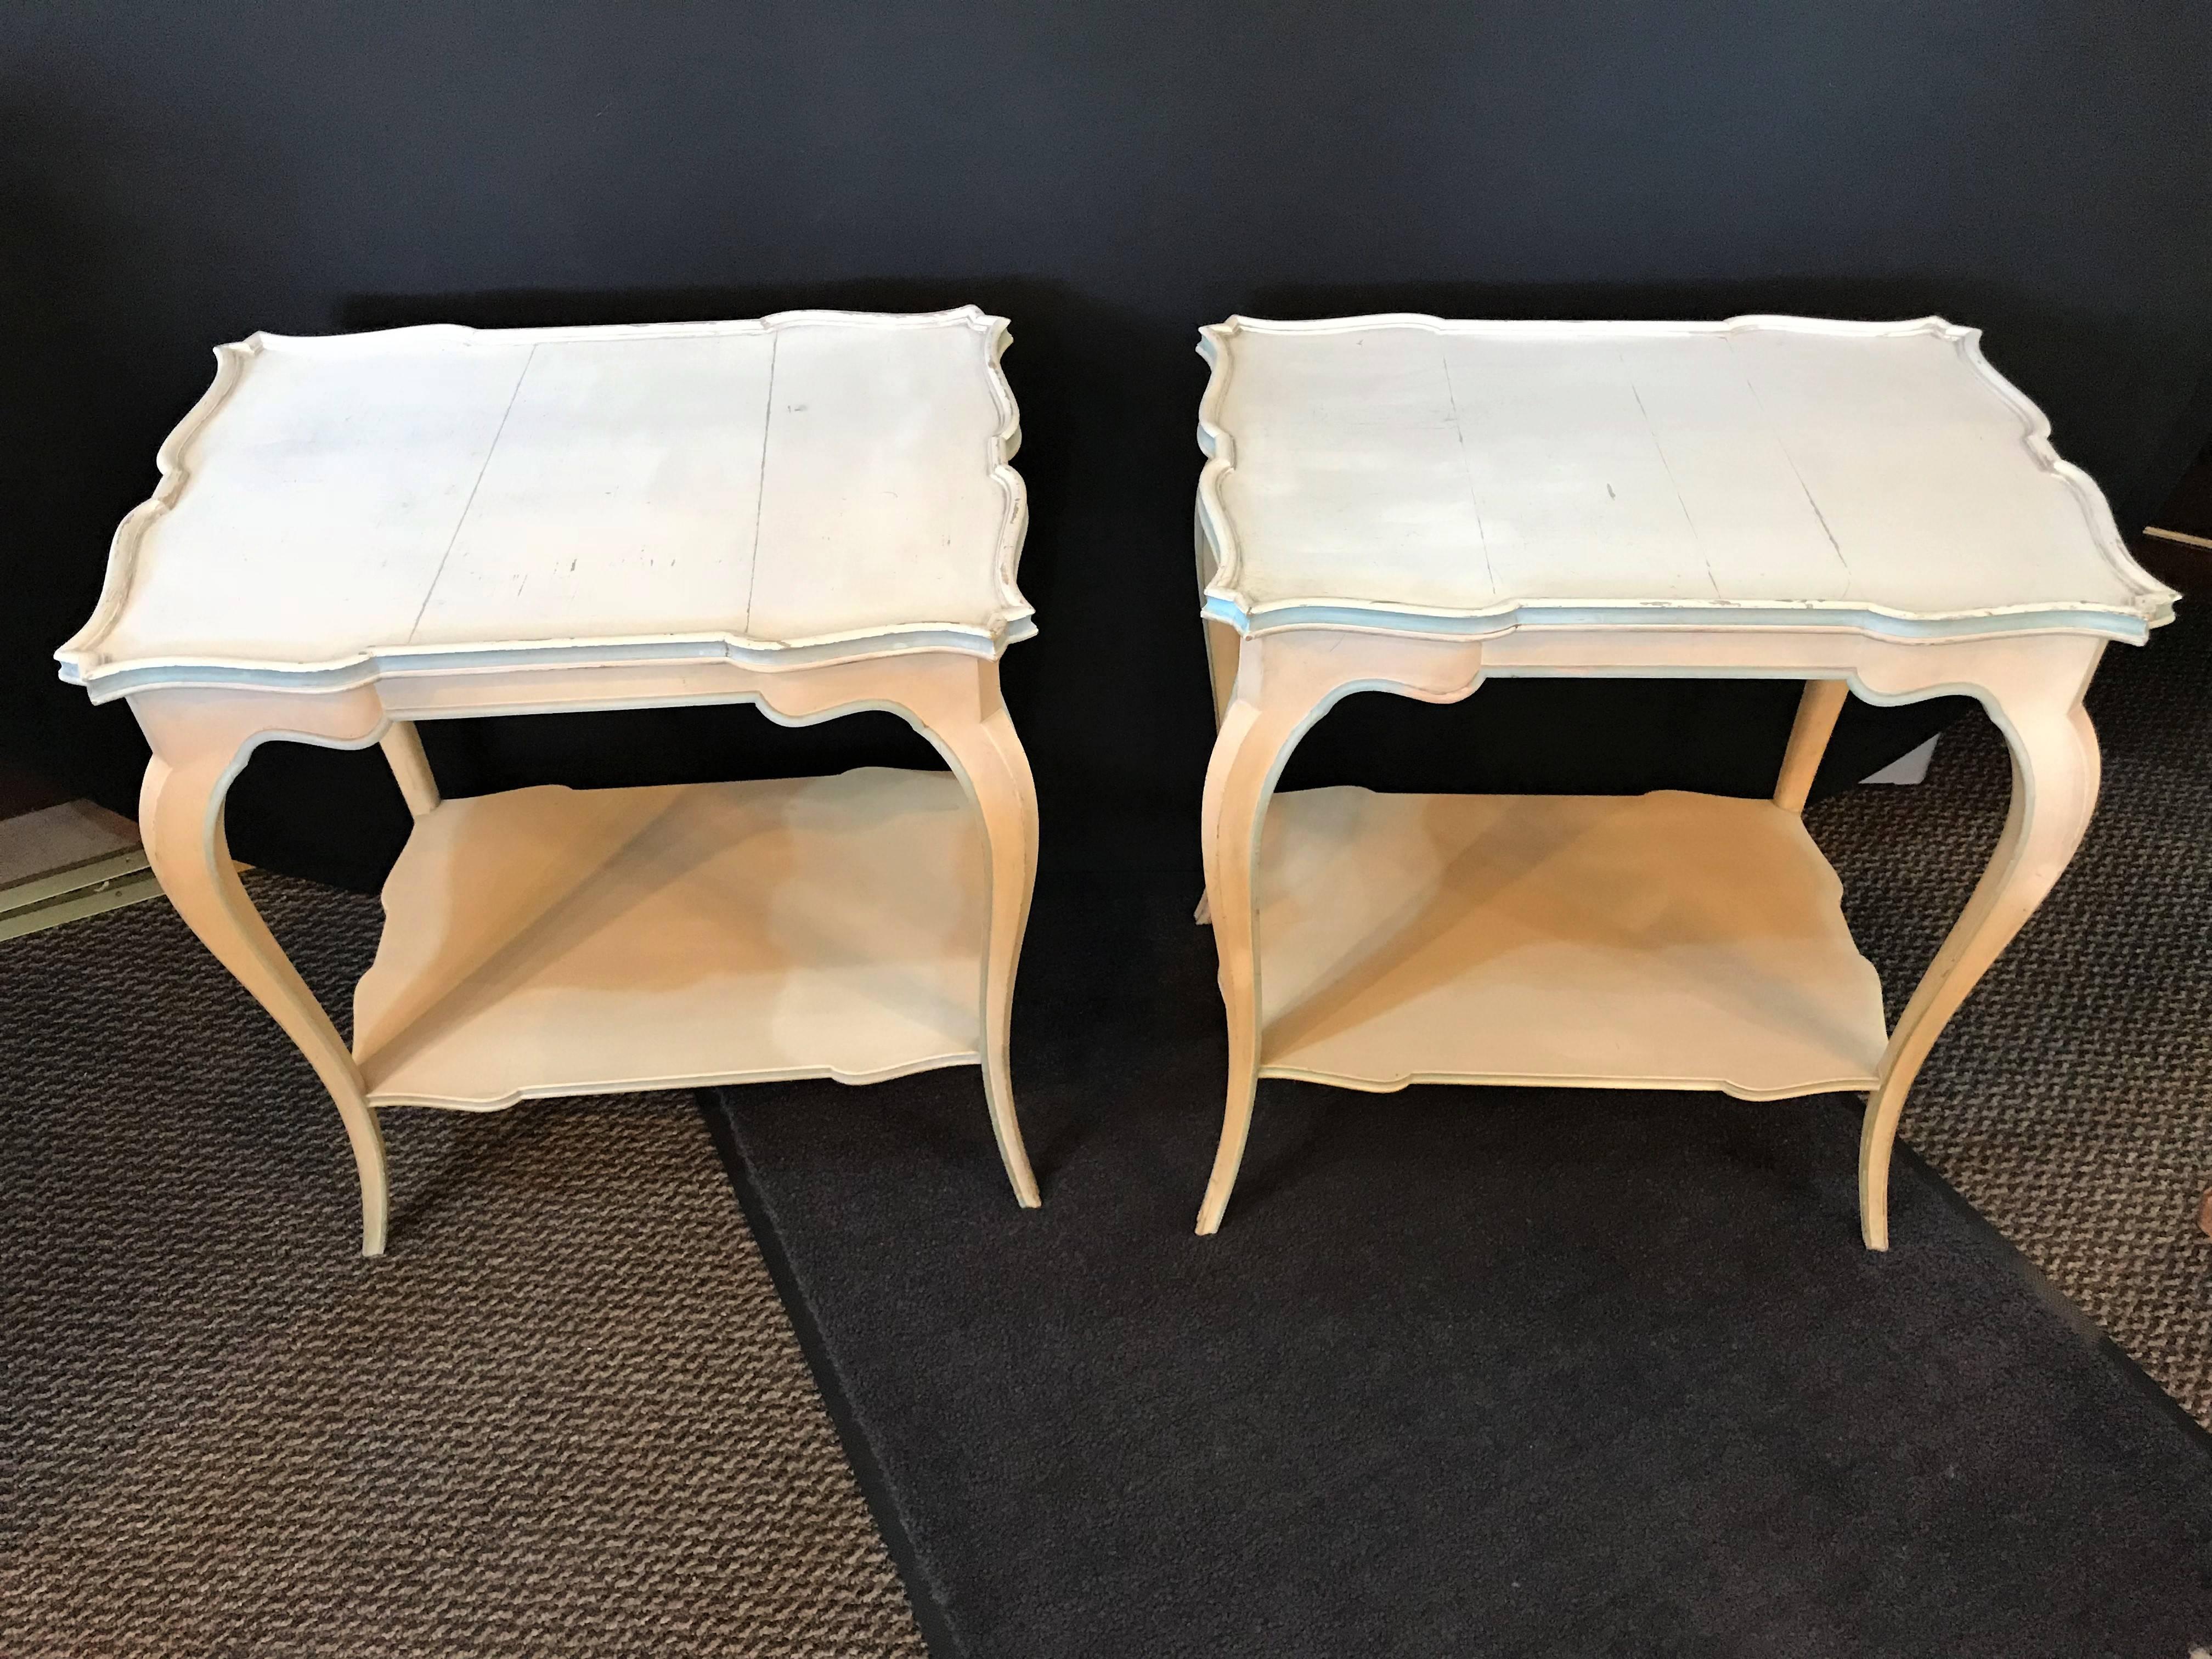 Hollywood Regency Pair of Distressed Paint Decorated Maison Jansen Side Tables or Night Tables